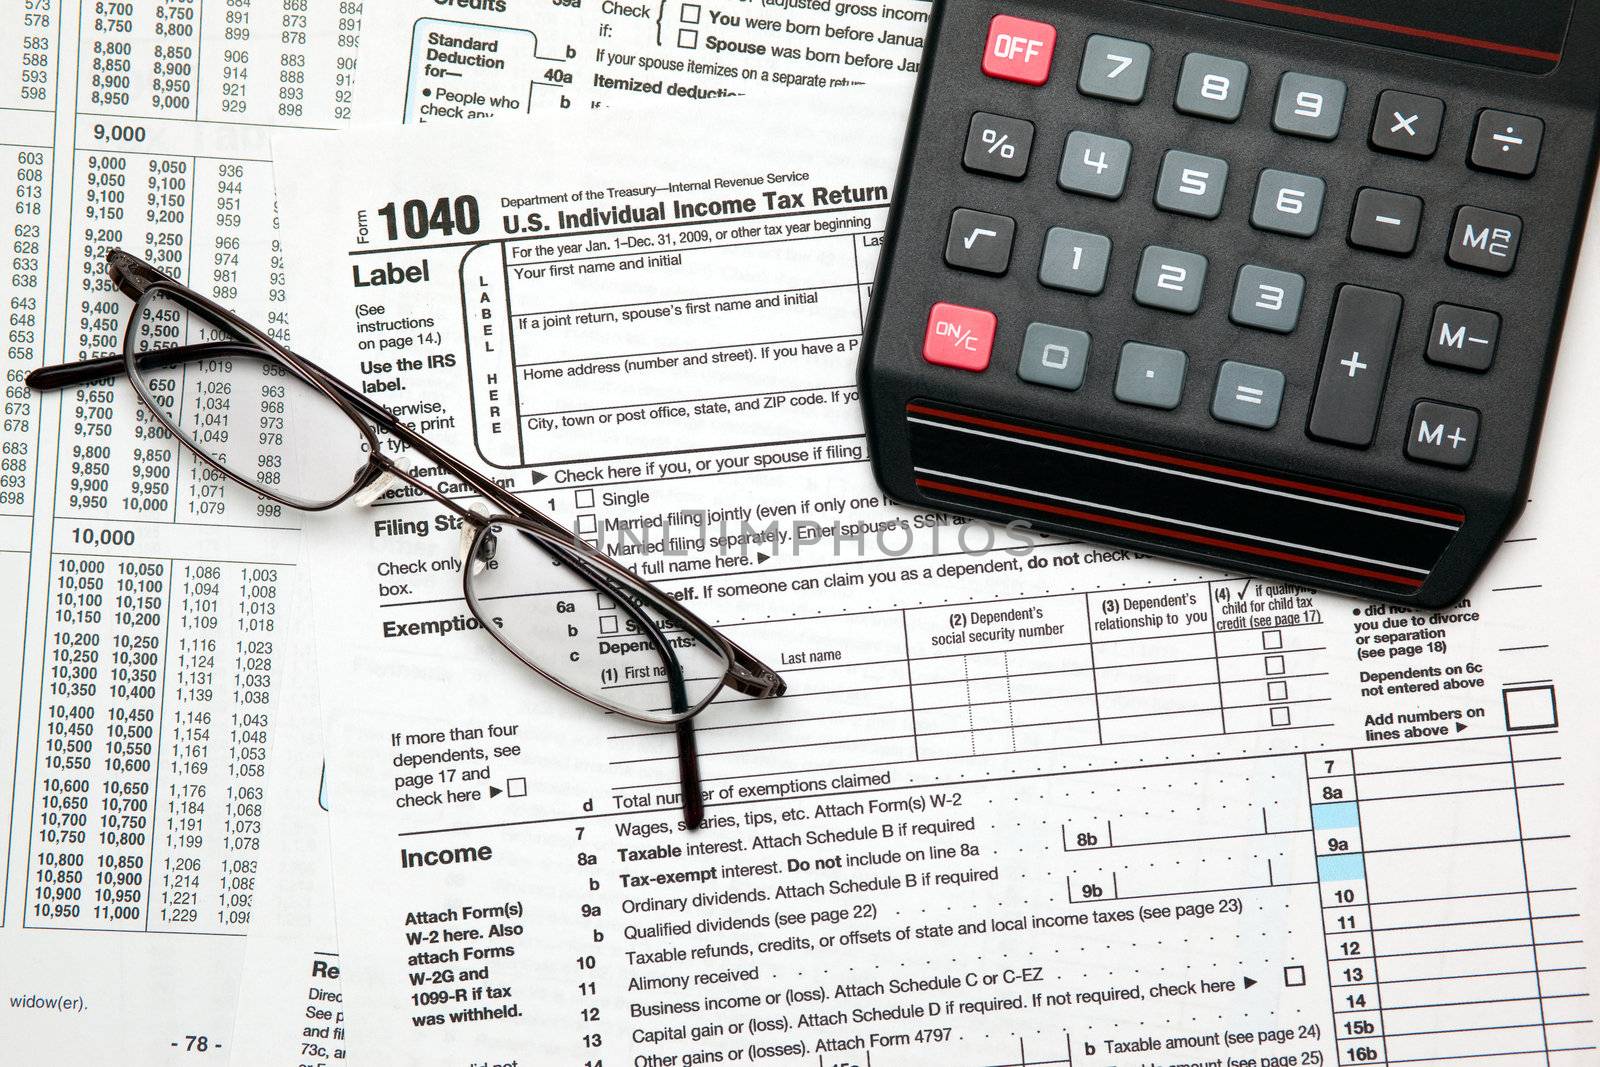 Tax time - Closeup of U.S. 1040 tax return with calculator and glasses